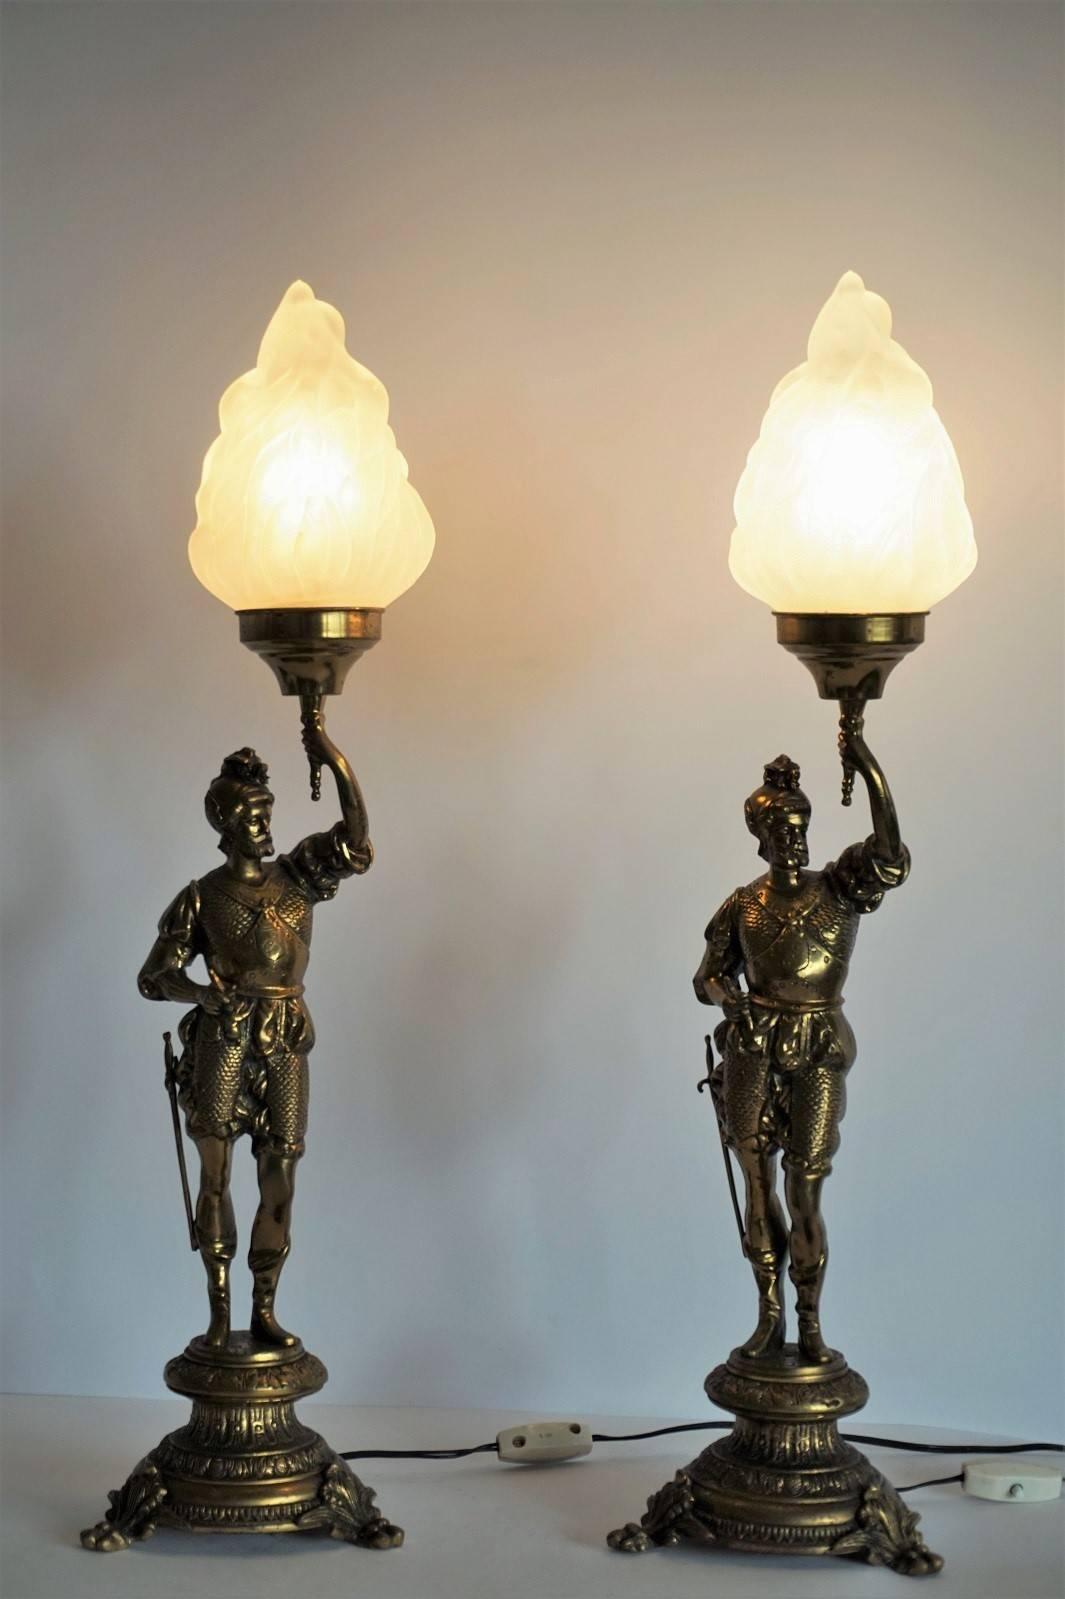 Pair of late 19th century solid bronze and brass soldiers candelabra later converted to table lamps, with large frosted glass shades.

Measures: Total height: 25 in (64 cm) 
height without lampshade: 18 in (46 cm)
Base diameter: 6 ¼ in (15.5